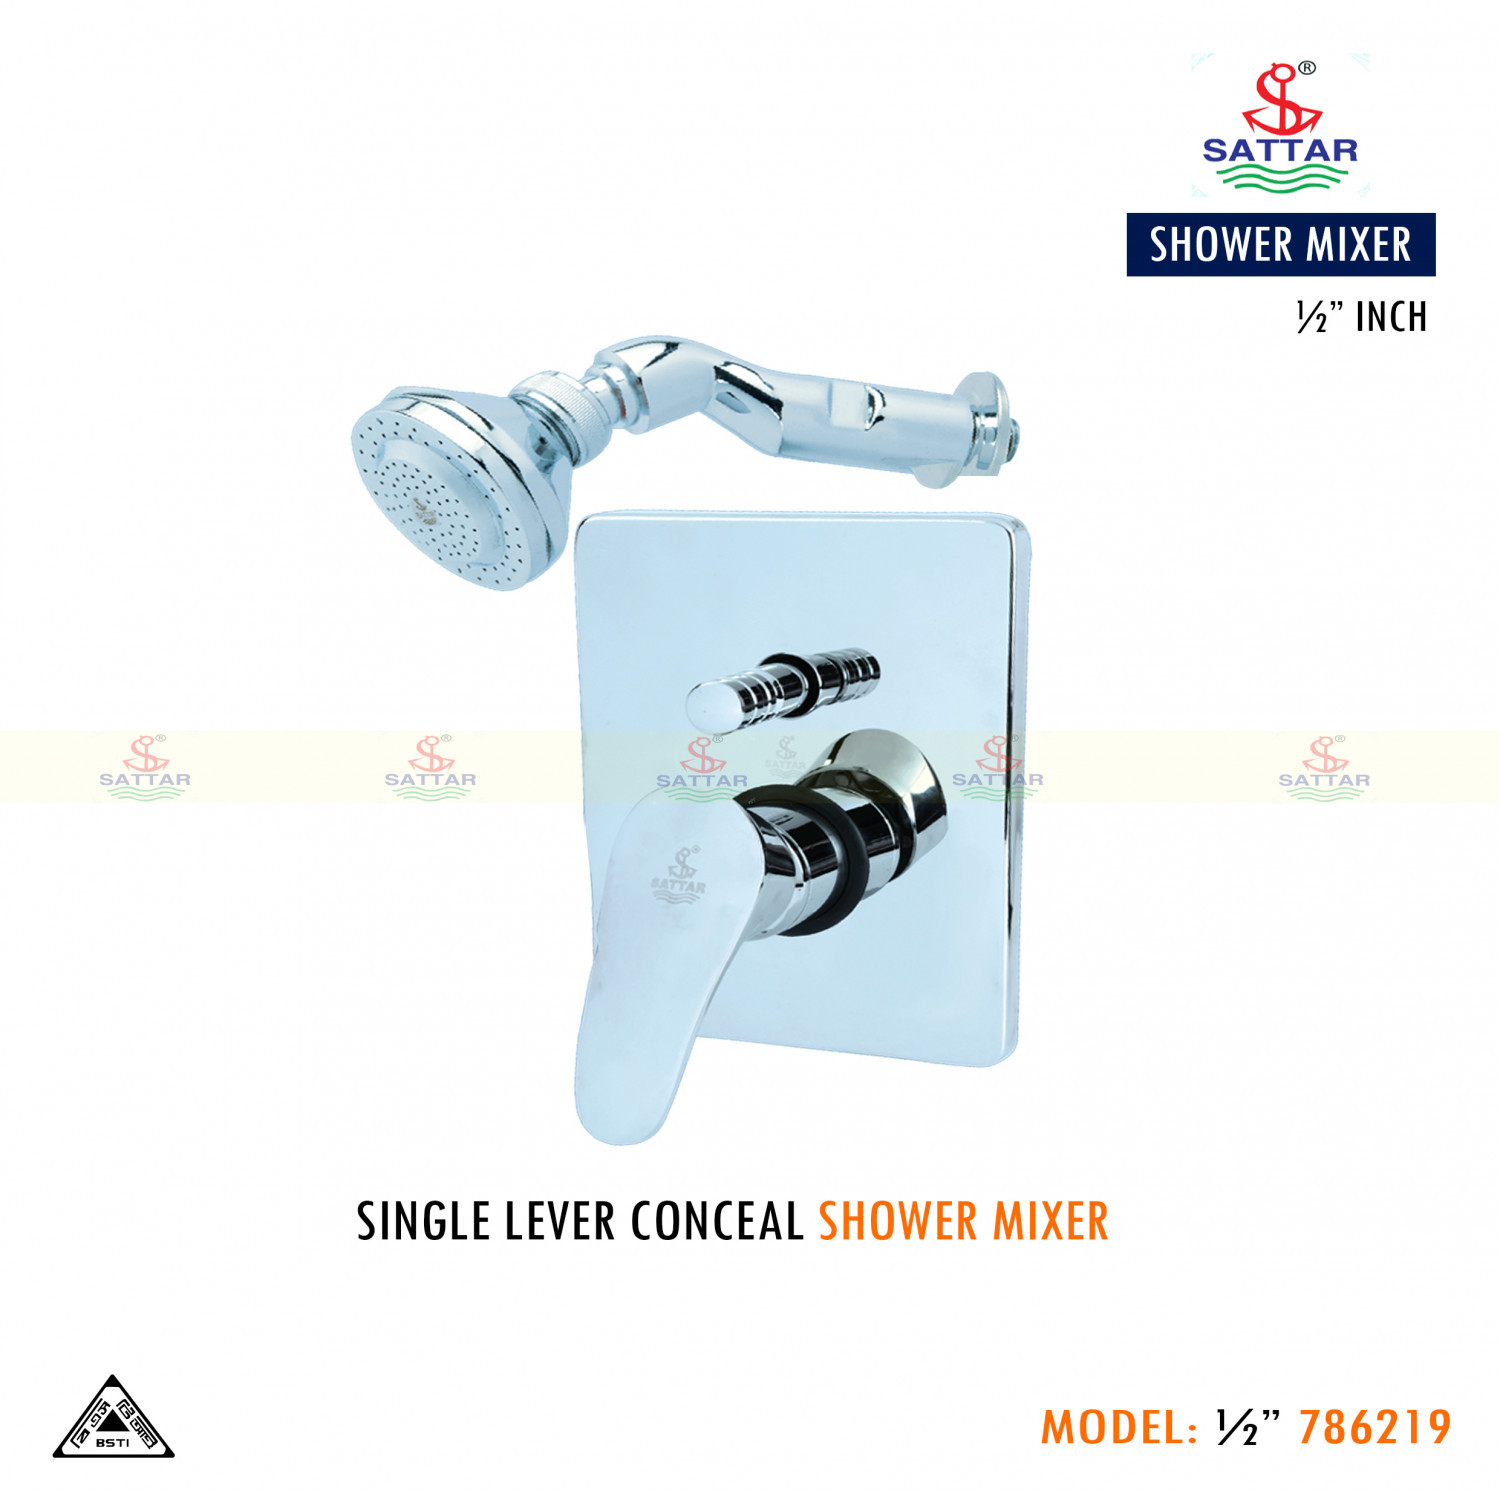 ½” SHOWER MIXER AND CONCEAL SATTAR SMI-786219ST